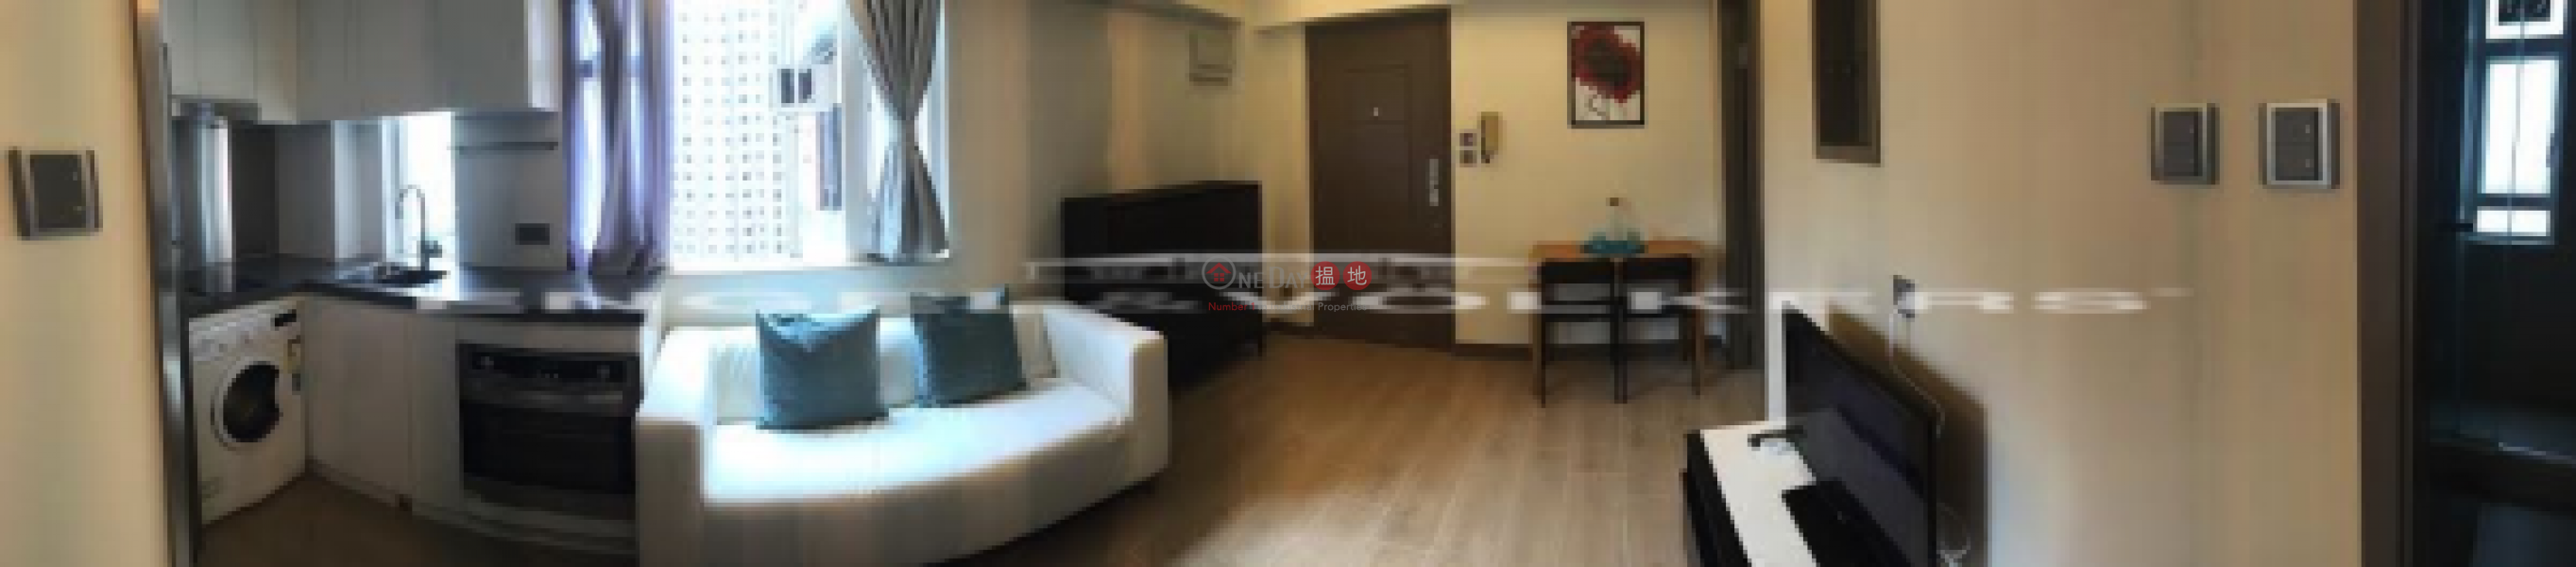 Property Search Hong Kong | OneDay | Residential, Sales Listings, 2 Bedroom Flat for Sale in Sai Ying Pun